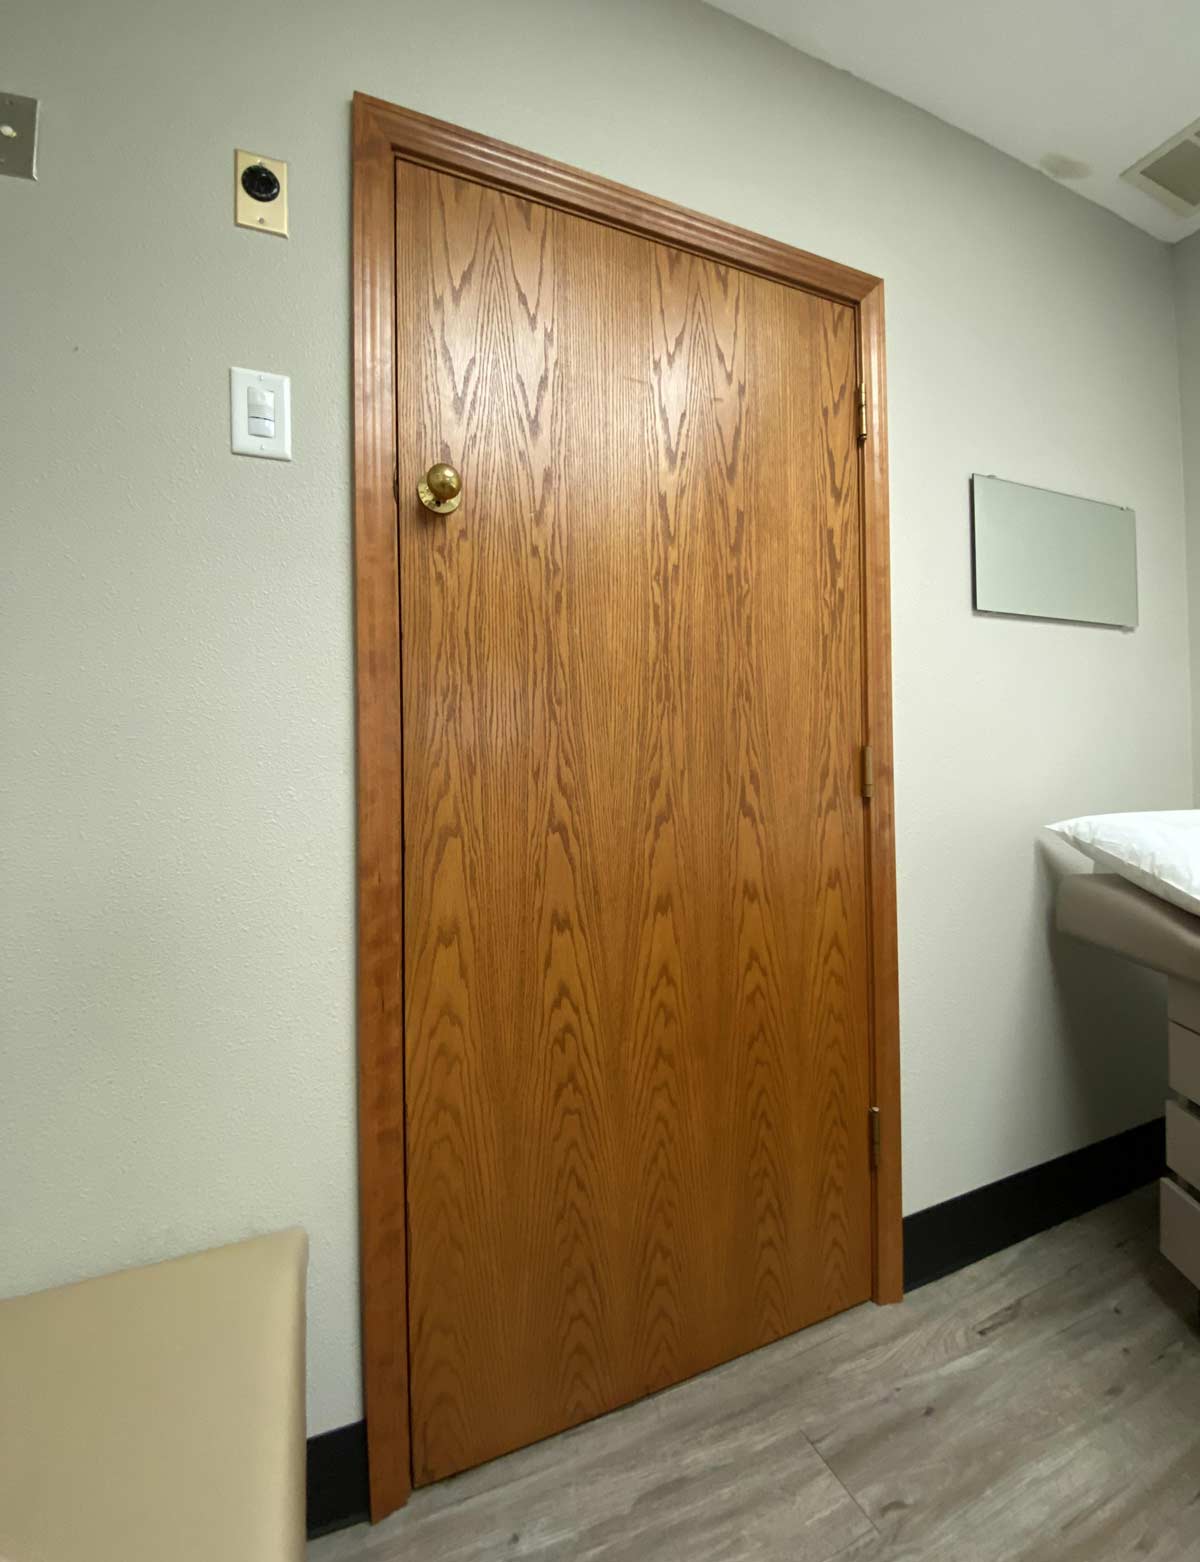 Door knob is higher at the doctor’s office to prevent kids from escaping